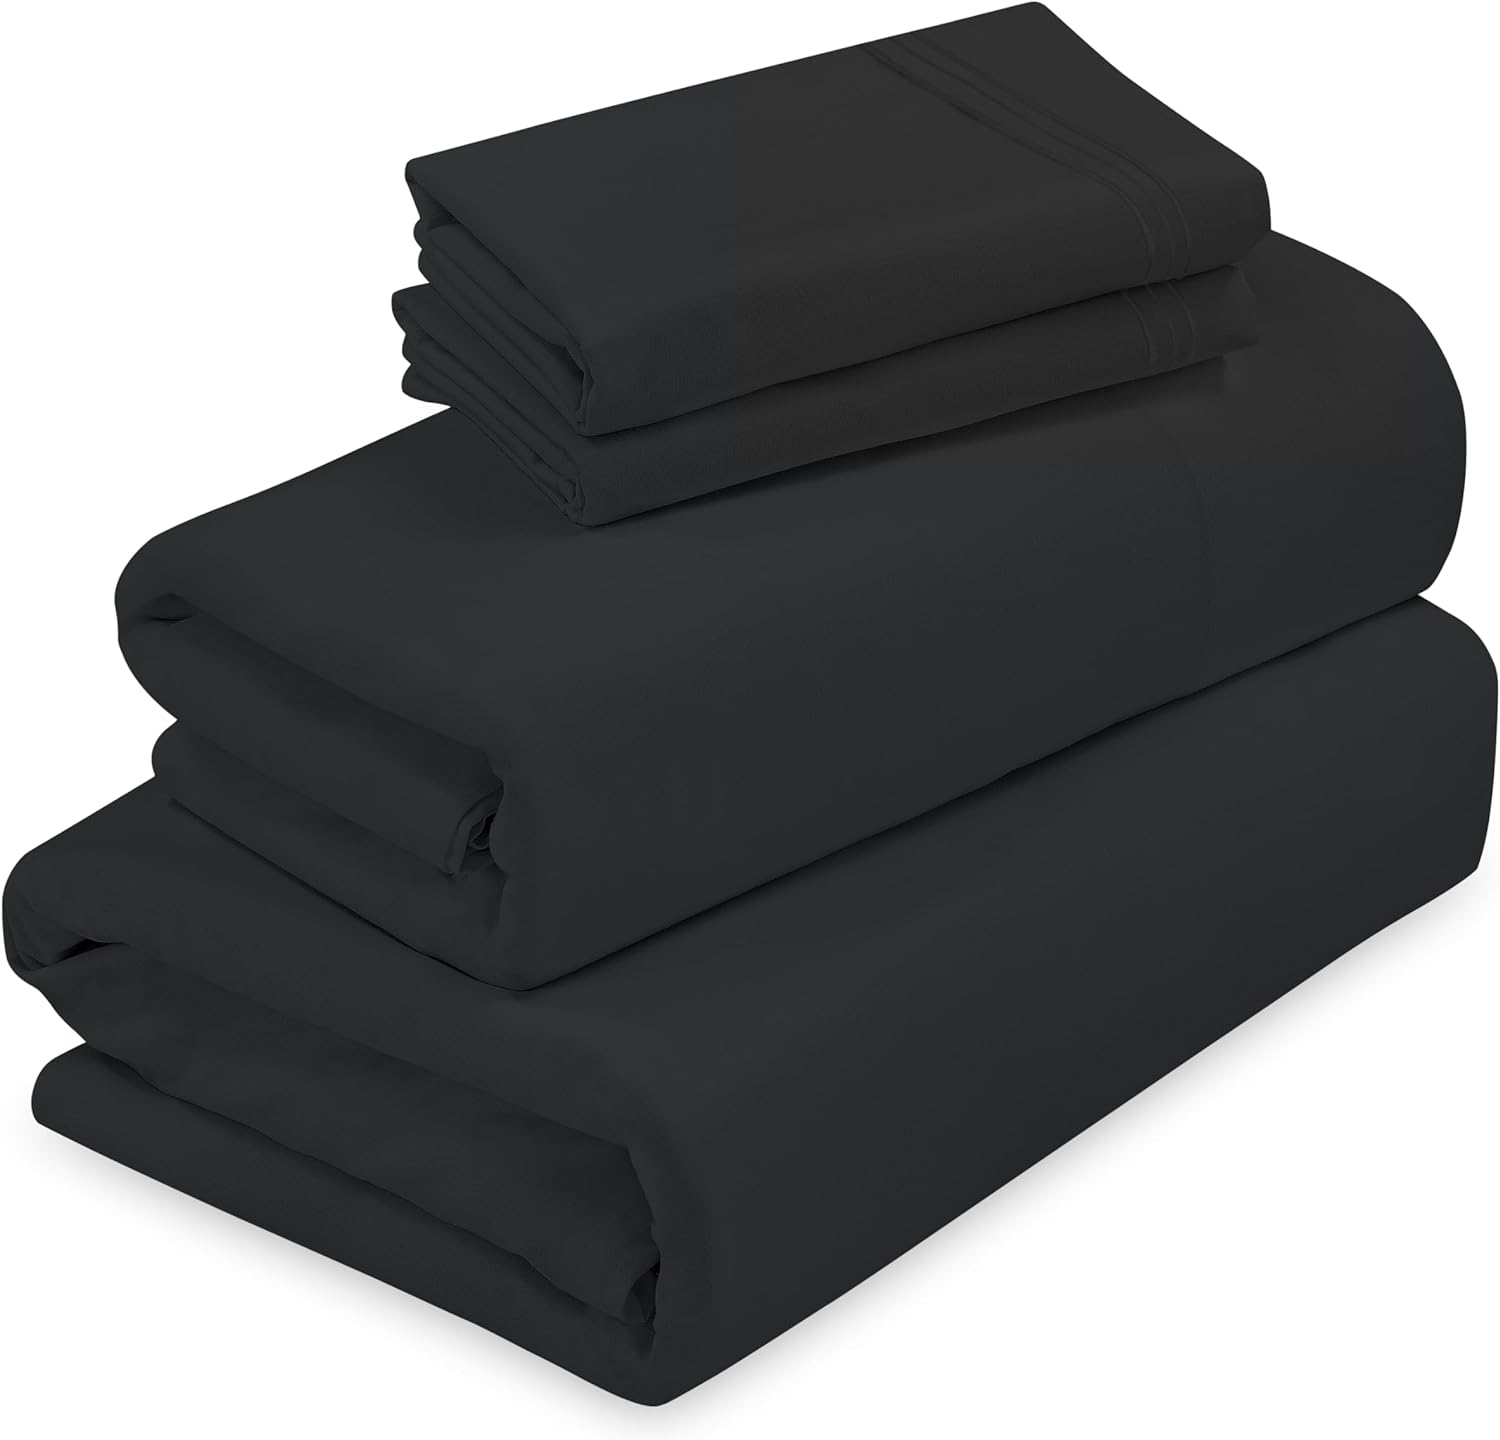 ROYALE LINENS - 4 Piece Queen Bed Sheet - Soft Brushed Microfiber 1800 Bedding Set - 1 Fitted Sheet, 1 Flat Sheet, 2 Pillow Case - Wrinkle & Fade Resistant Luxury Queen Size Sheet Set (Queen, Black)